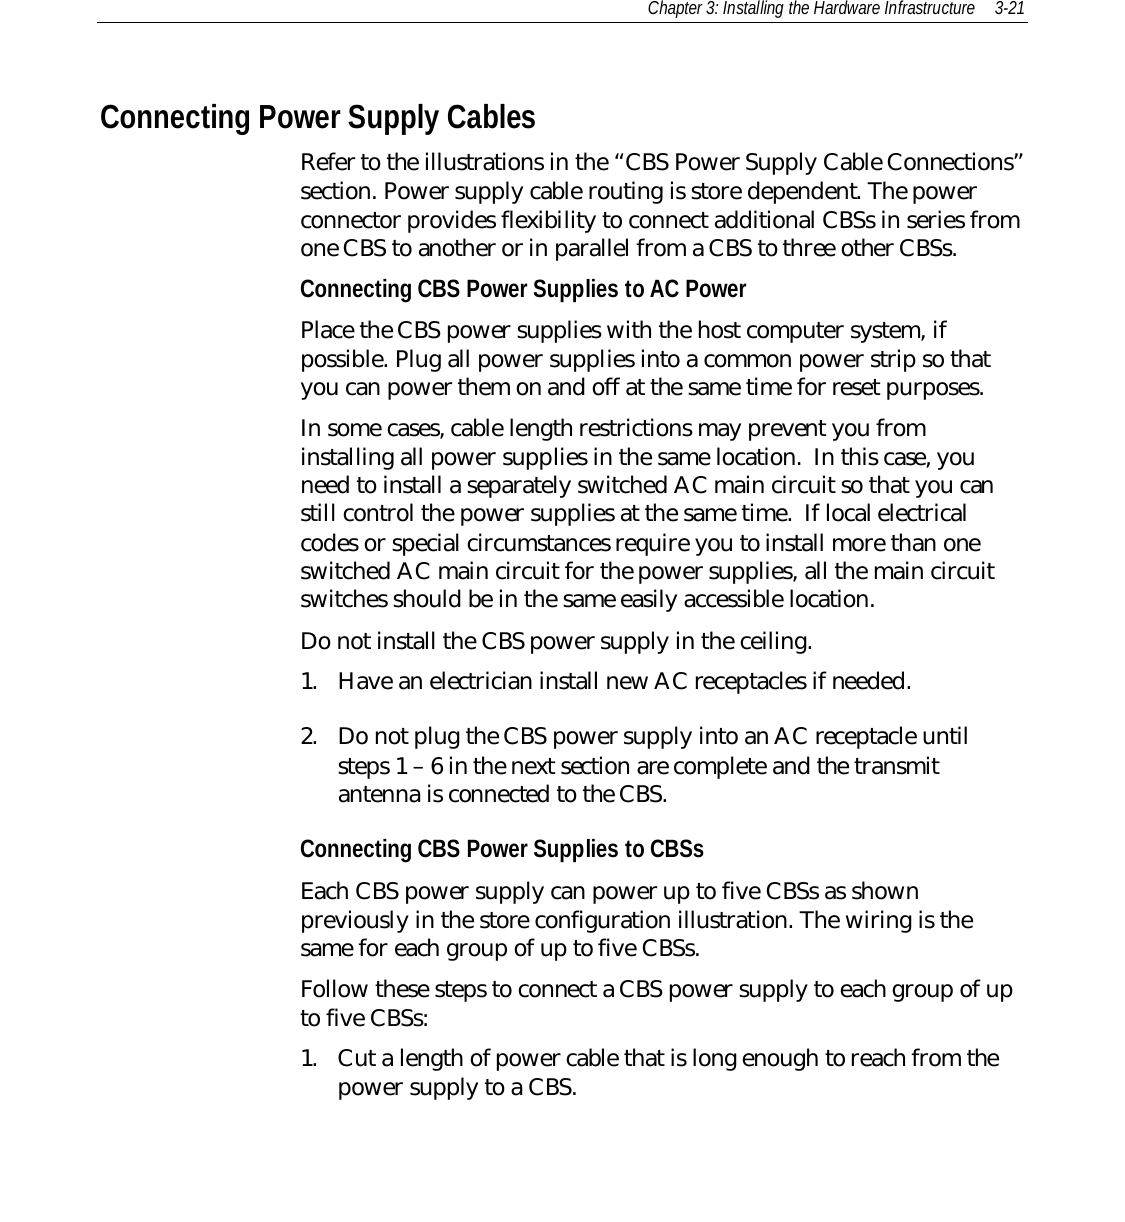 Chapter 3: Installing the Hardware Infrastructure 3-21Connecting Power Supply CablesRefer to the illustrations in the “CBS Power Supply Cable Connections”section. Power supply cable routing is store dependent. The powerconnector provides flexibility to connect additional CBSs in series fromone CBS to another or in parallel from a CBS to three other CBSs.Connecting CBS Power Supplies to AC PowerPlace the CBS power supplies with the host computer system, ifpossible. Plug all power supplies into a common power strip so thatyou can power them on and off at the same time for reset purposes.In some cases, cable length restrictions may prevent you frominstalling all power supplies in the same location.  In this case, youneed to install a separately switched AC main circuit so that you canstill control the power supplies at the same time.  If local electricalcodes or special circumstances require you to install more than oneswitched AC main circuit for the power supplies, all the main circuitswitches should be in the same easily accessible location.Do not install the CBS power supply in the ceiling.1. Have an electrician install new AC receptacles if needed.2. Do not plug the CBS power supply into an AC receptacle untilsteps 1 – 6 in the next section are complete and the transmitantenna is connected to the CBS.Connecting CBS Power Supplies to CBSsEach CBS power supply can power up to five CBSs as shownpreviously in the store configuration illustration. The wiring is thesame for each group of up to five CBSs.Follow these steps to connect a CBS power supply to each group of upto five CBSs:1. Cut a length of power cable that is long enough to reach from thepower supply to a CBS.